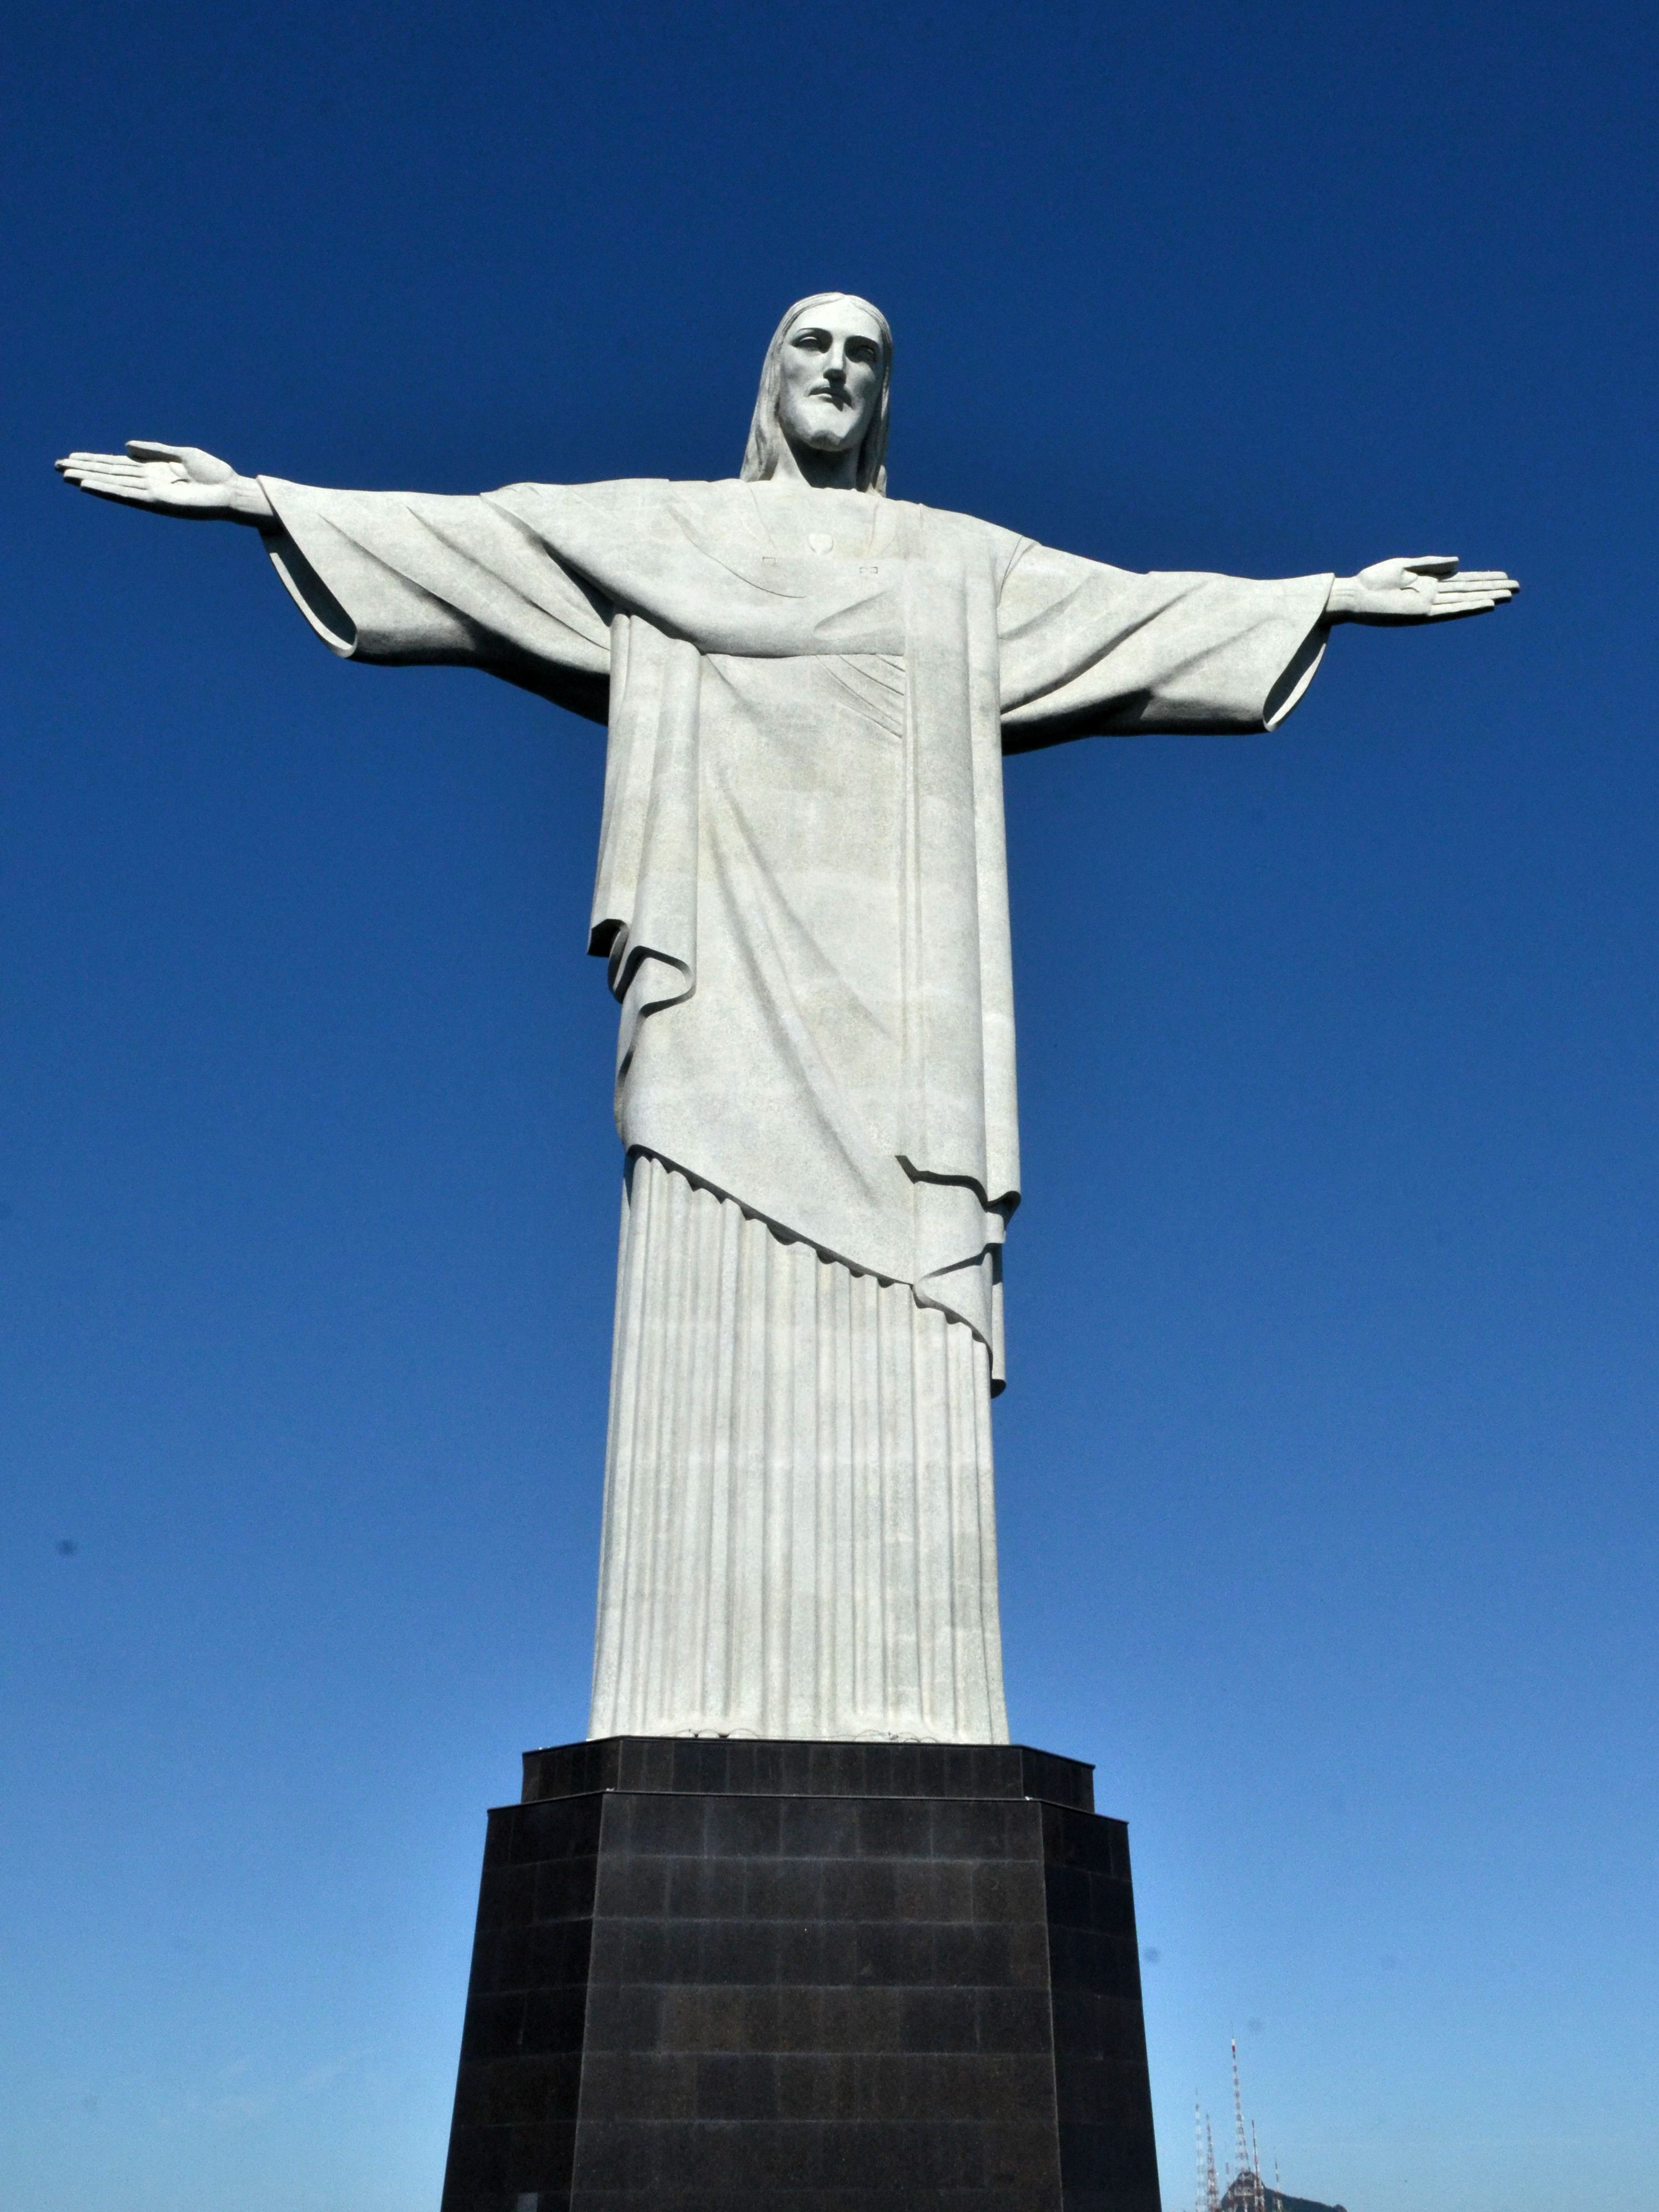 Click picture to see more of Cristo Redentor and Tijuco Natioal Park.